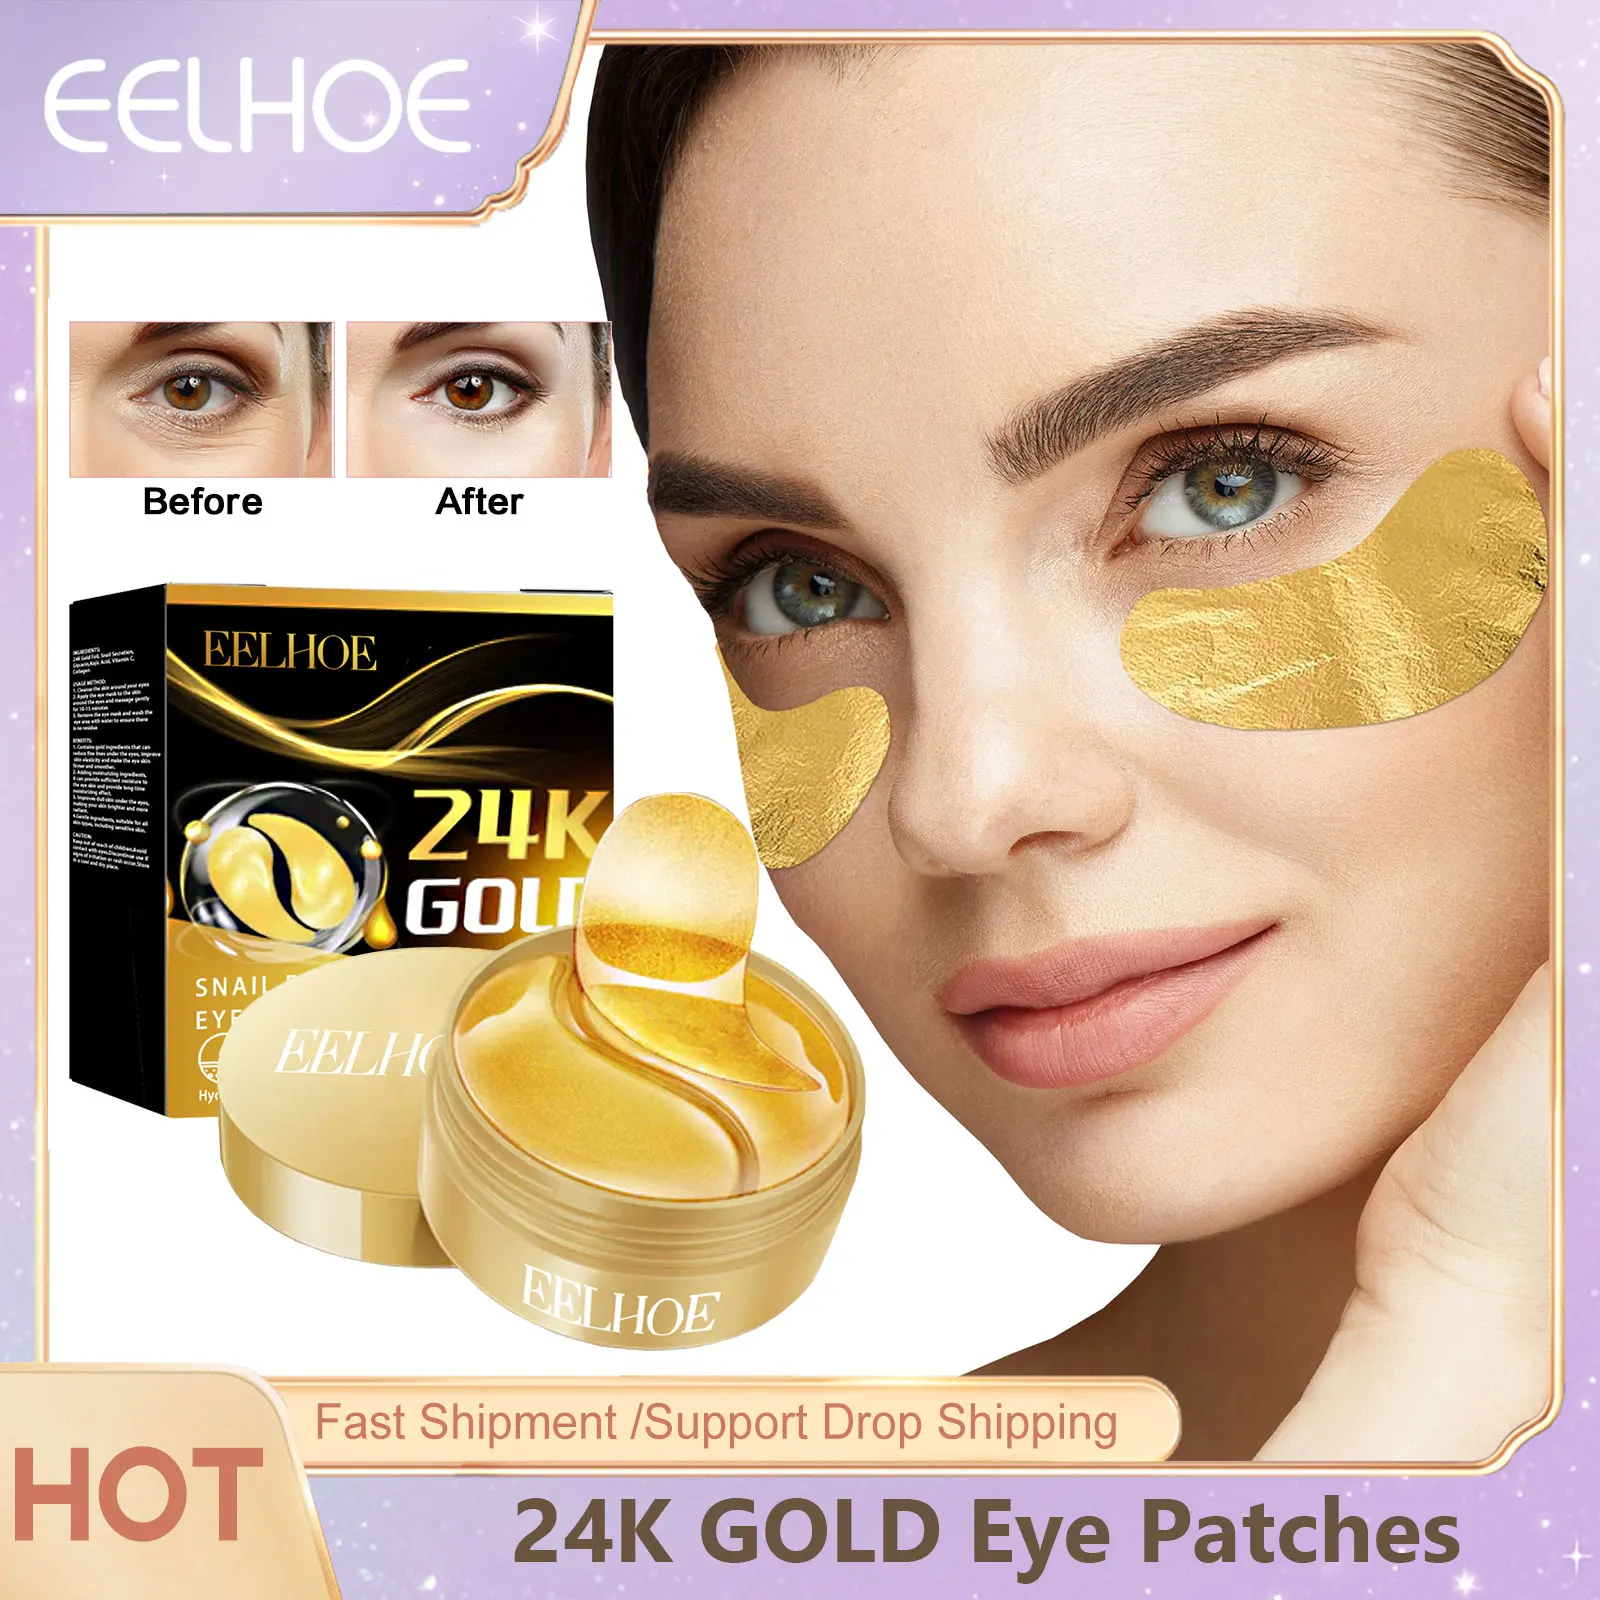 24K Gold Collagen Eye Mask Patches Wrinkles Fine Lines Remove Dark Circle Nourishing Anti Aging Skin Care Moisturize Around Eyes anti gravity bouncy cream conopeptide lifting beauty facial cream for face skin care cream remove wrinkles fine lines moisturize